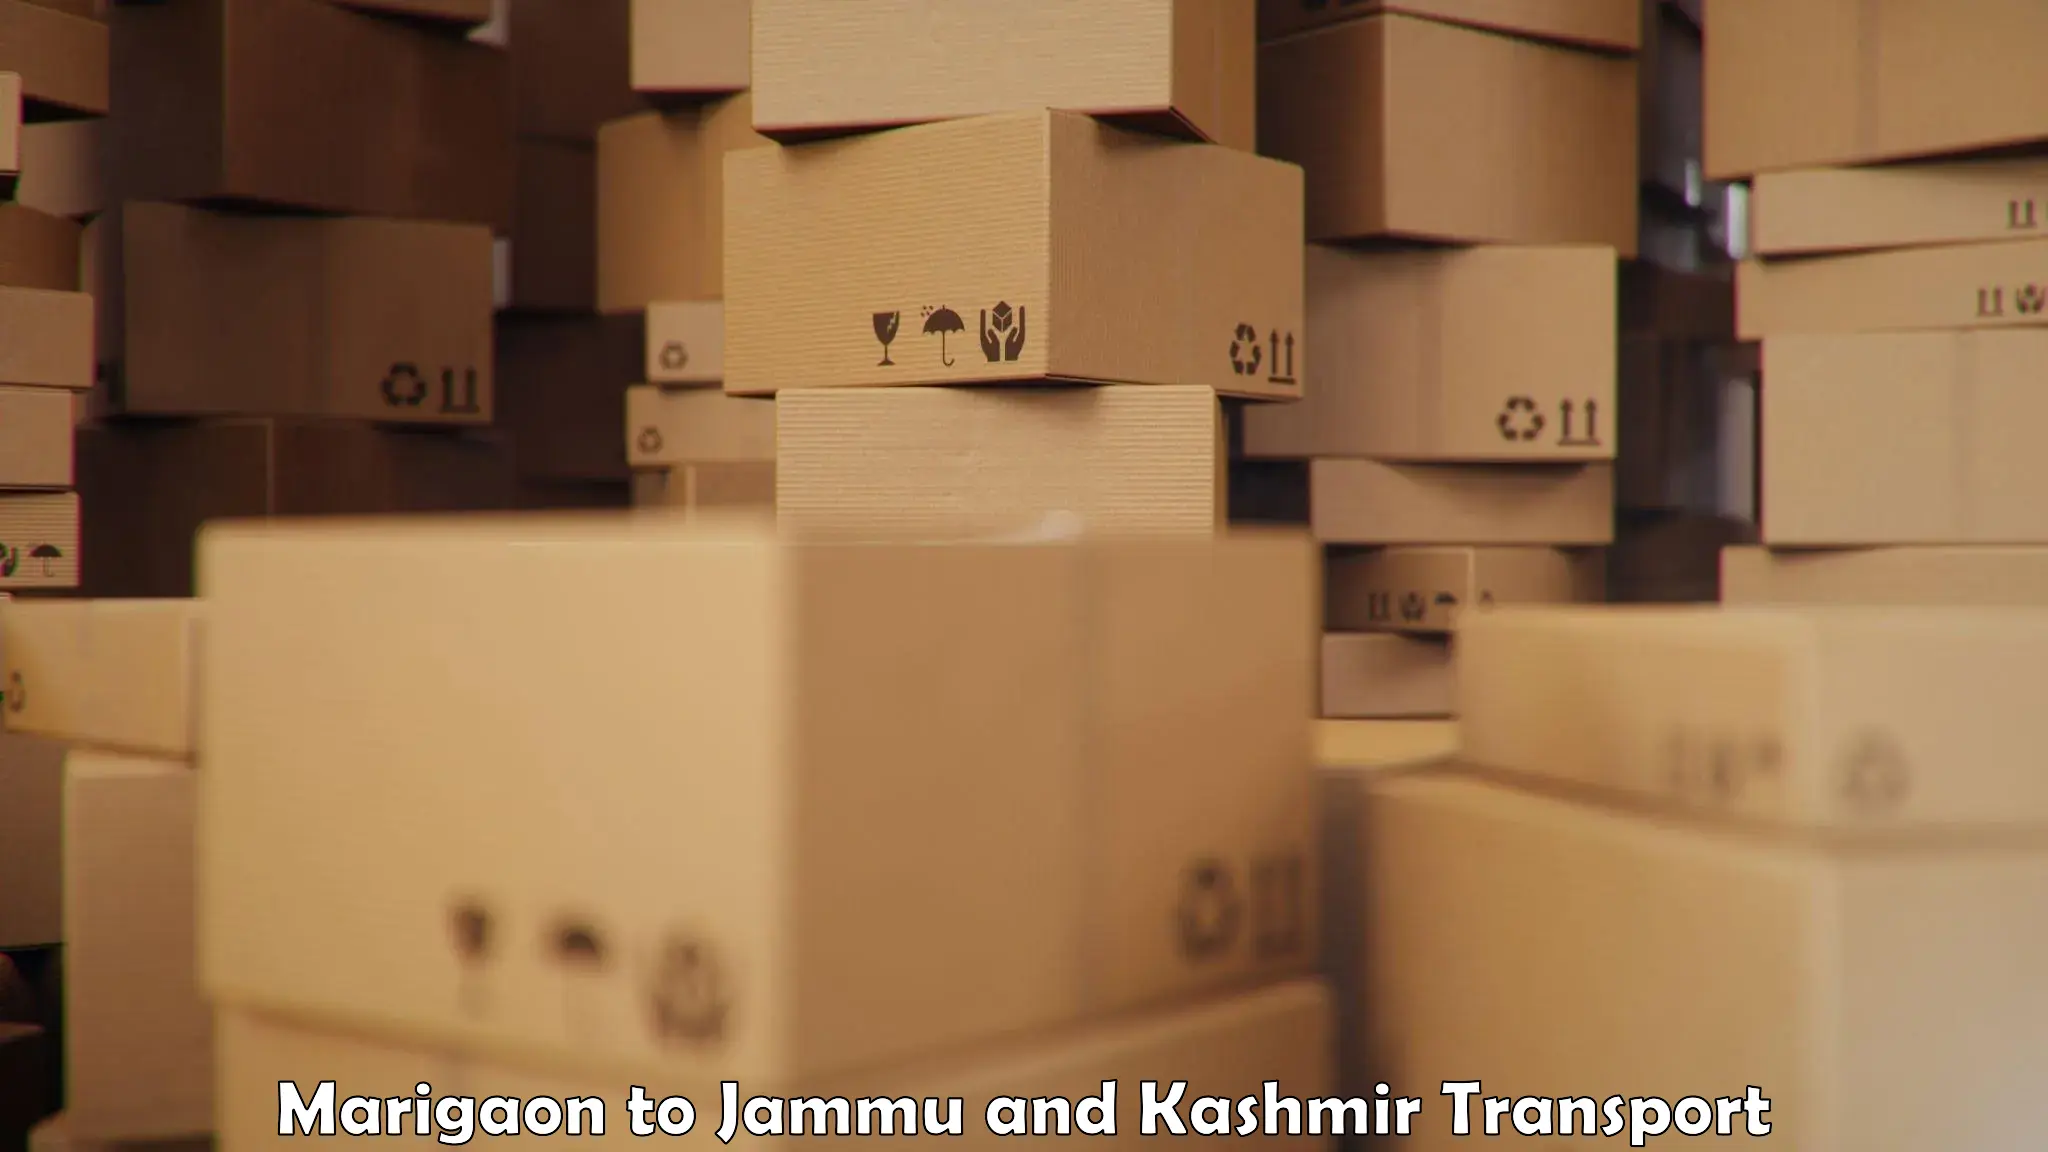 Truck transport companies in India Marigaon to Jakh